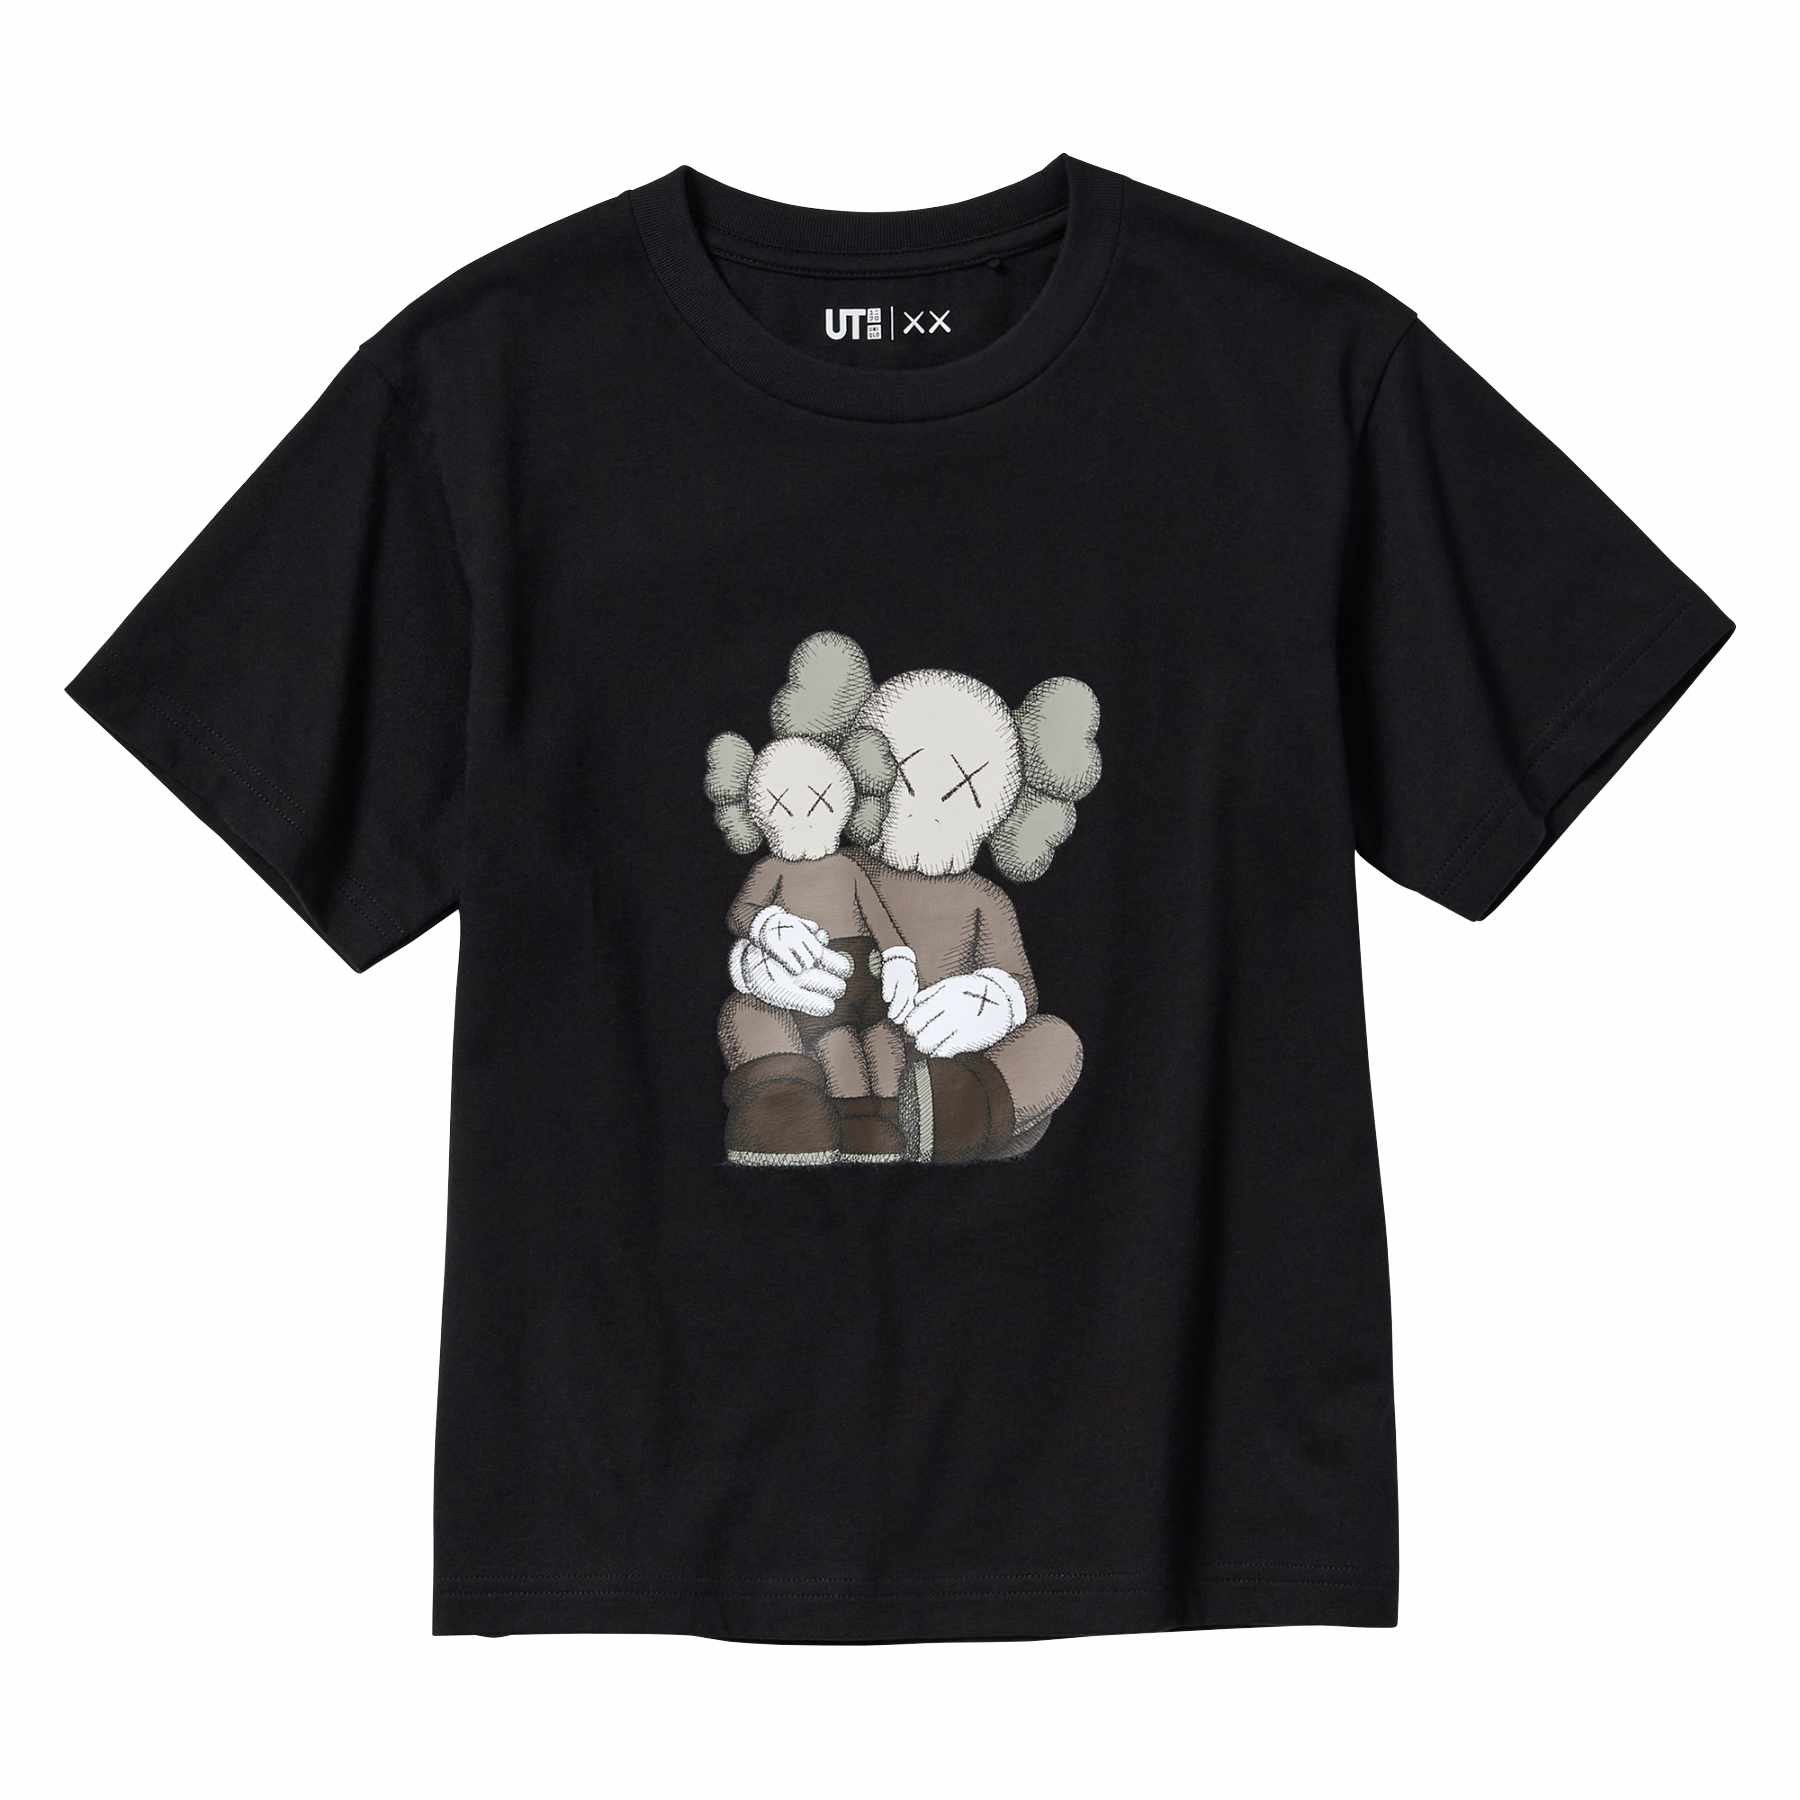 A black KAWS x UNIQLO T-shirt printed with a 'What Party" artwork